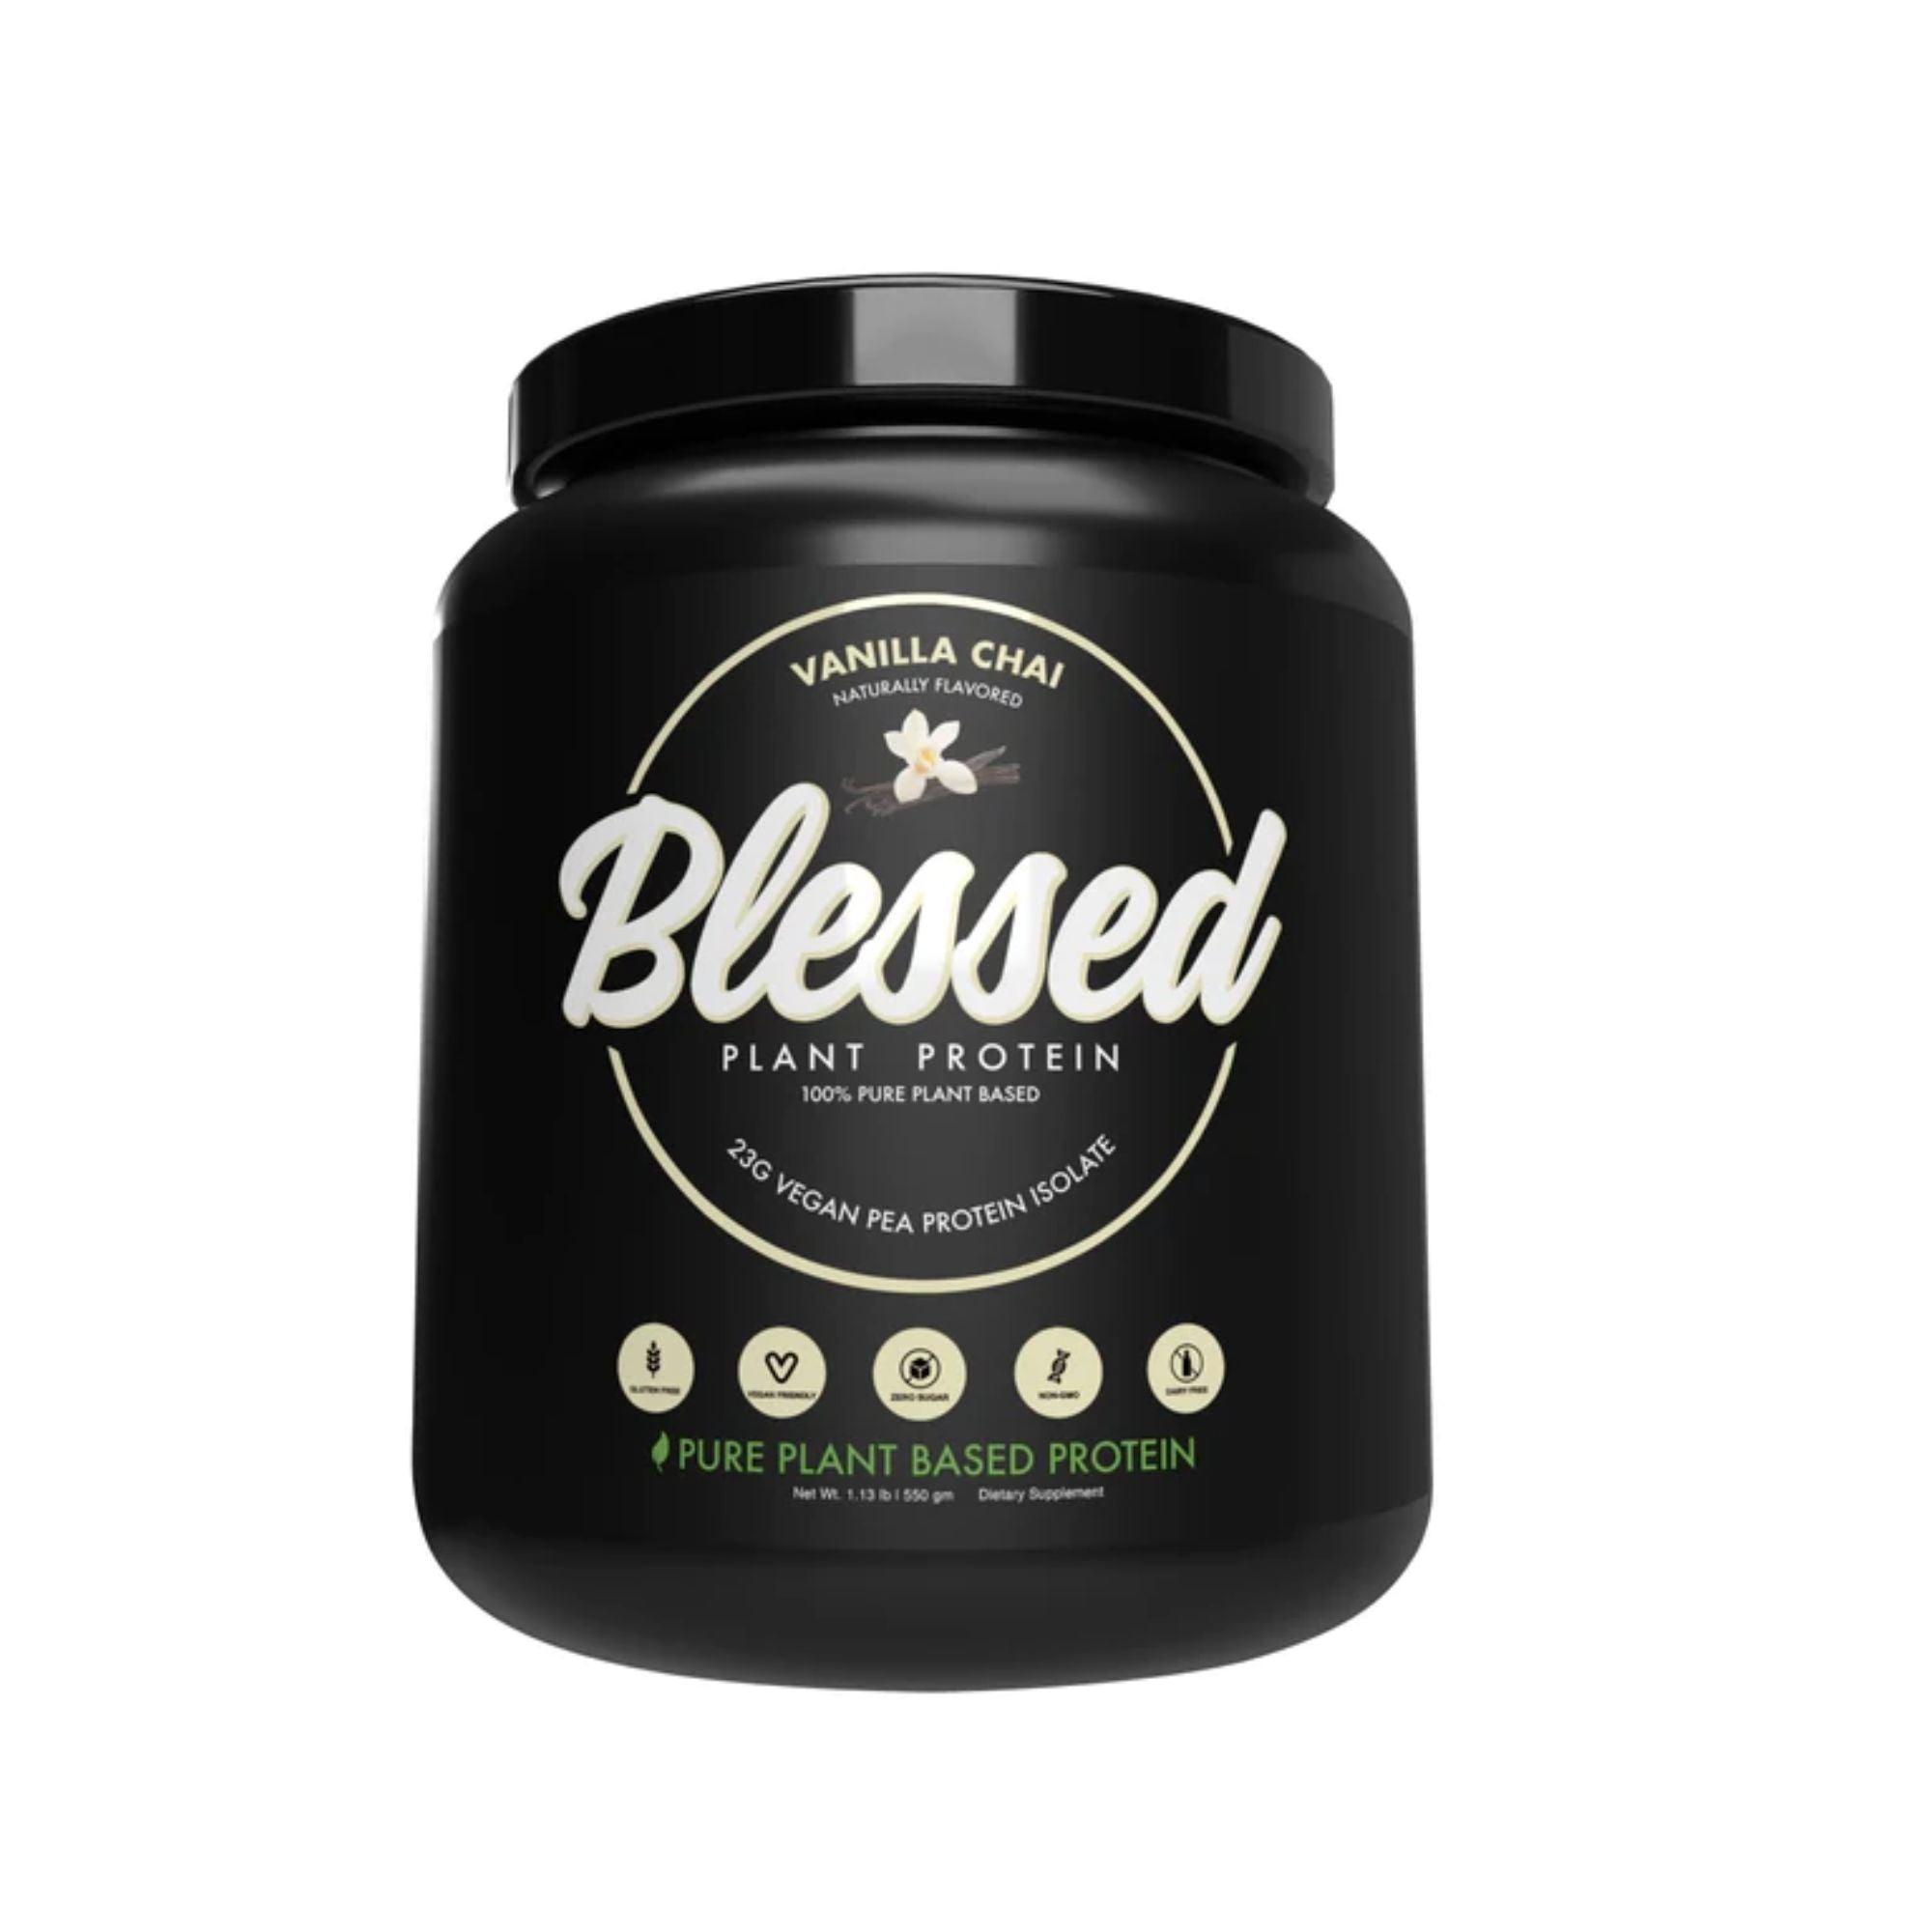 Blessed Plant Protein Powder